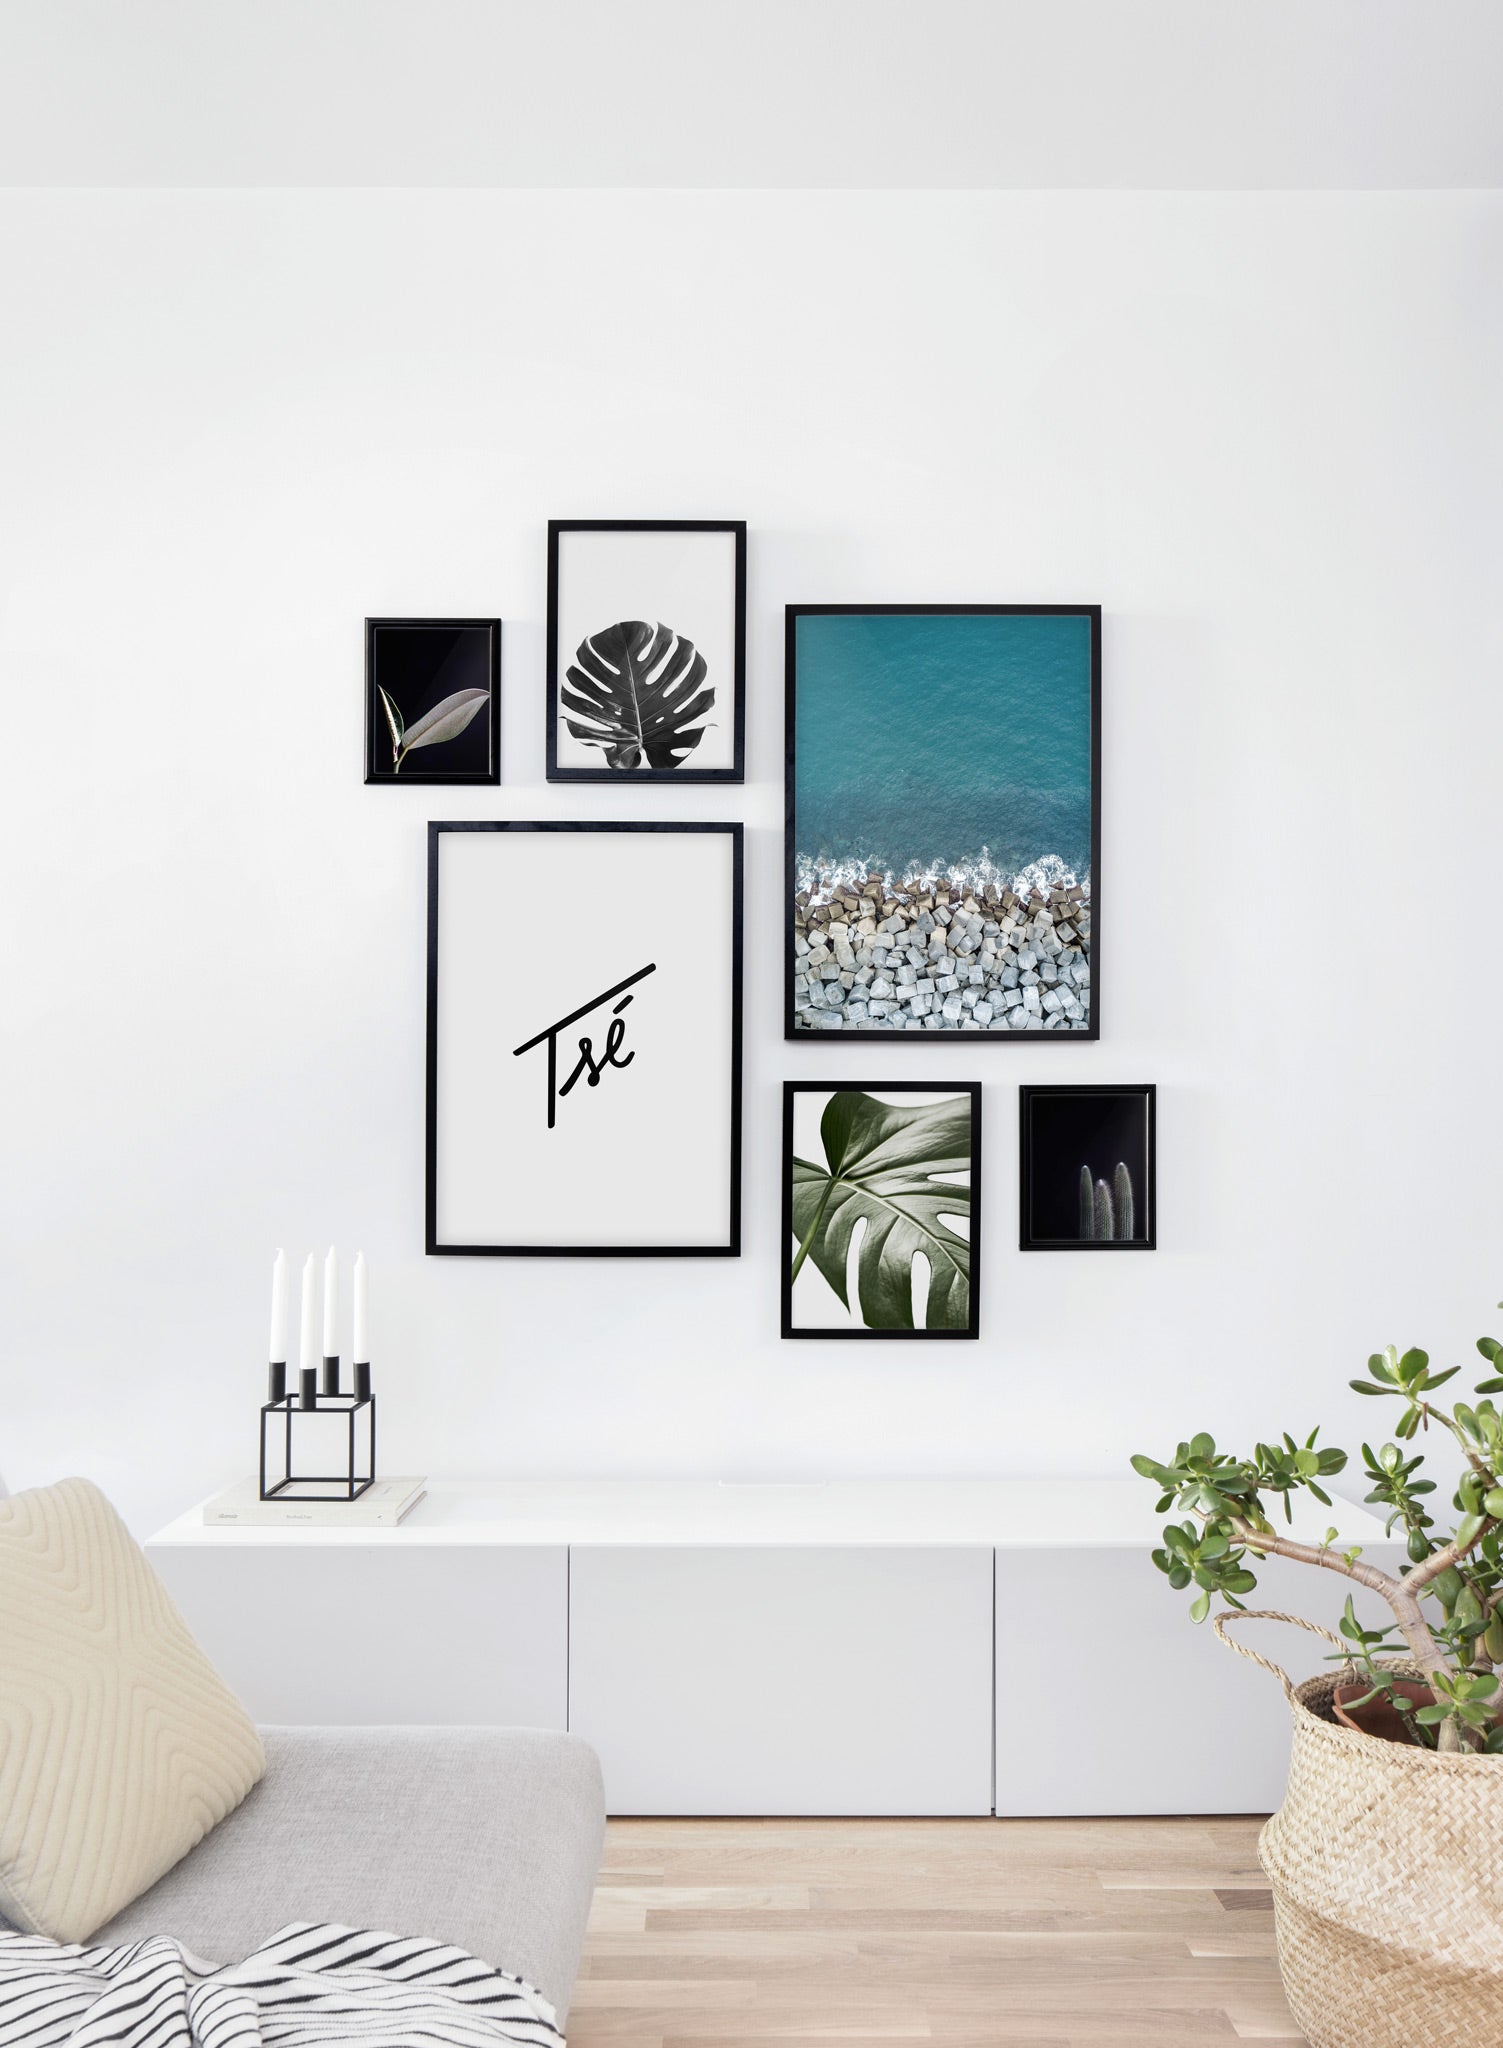 Scandinavian print by Opposite Wall with Stones art photo - Living room wall gallery